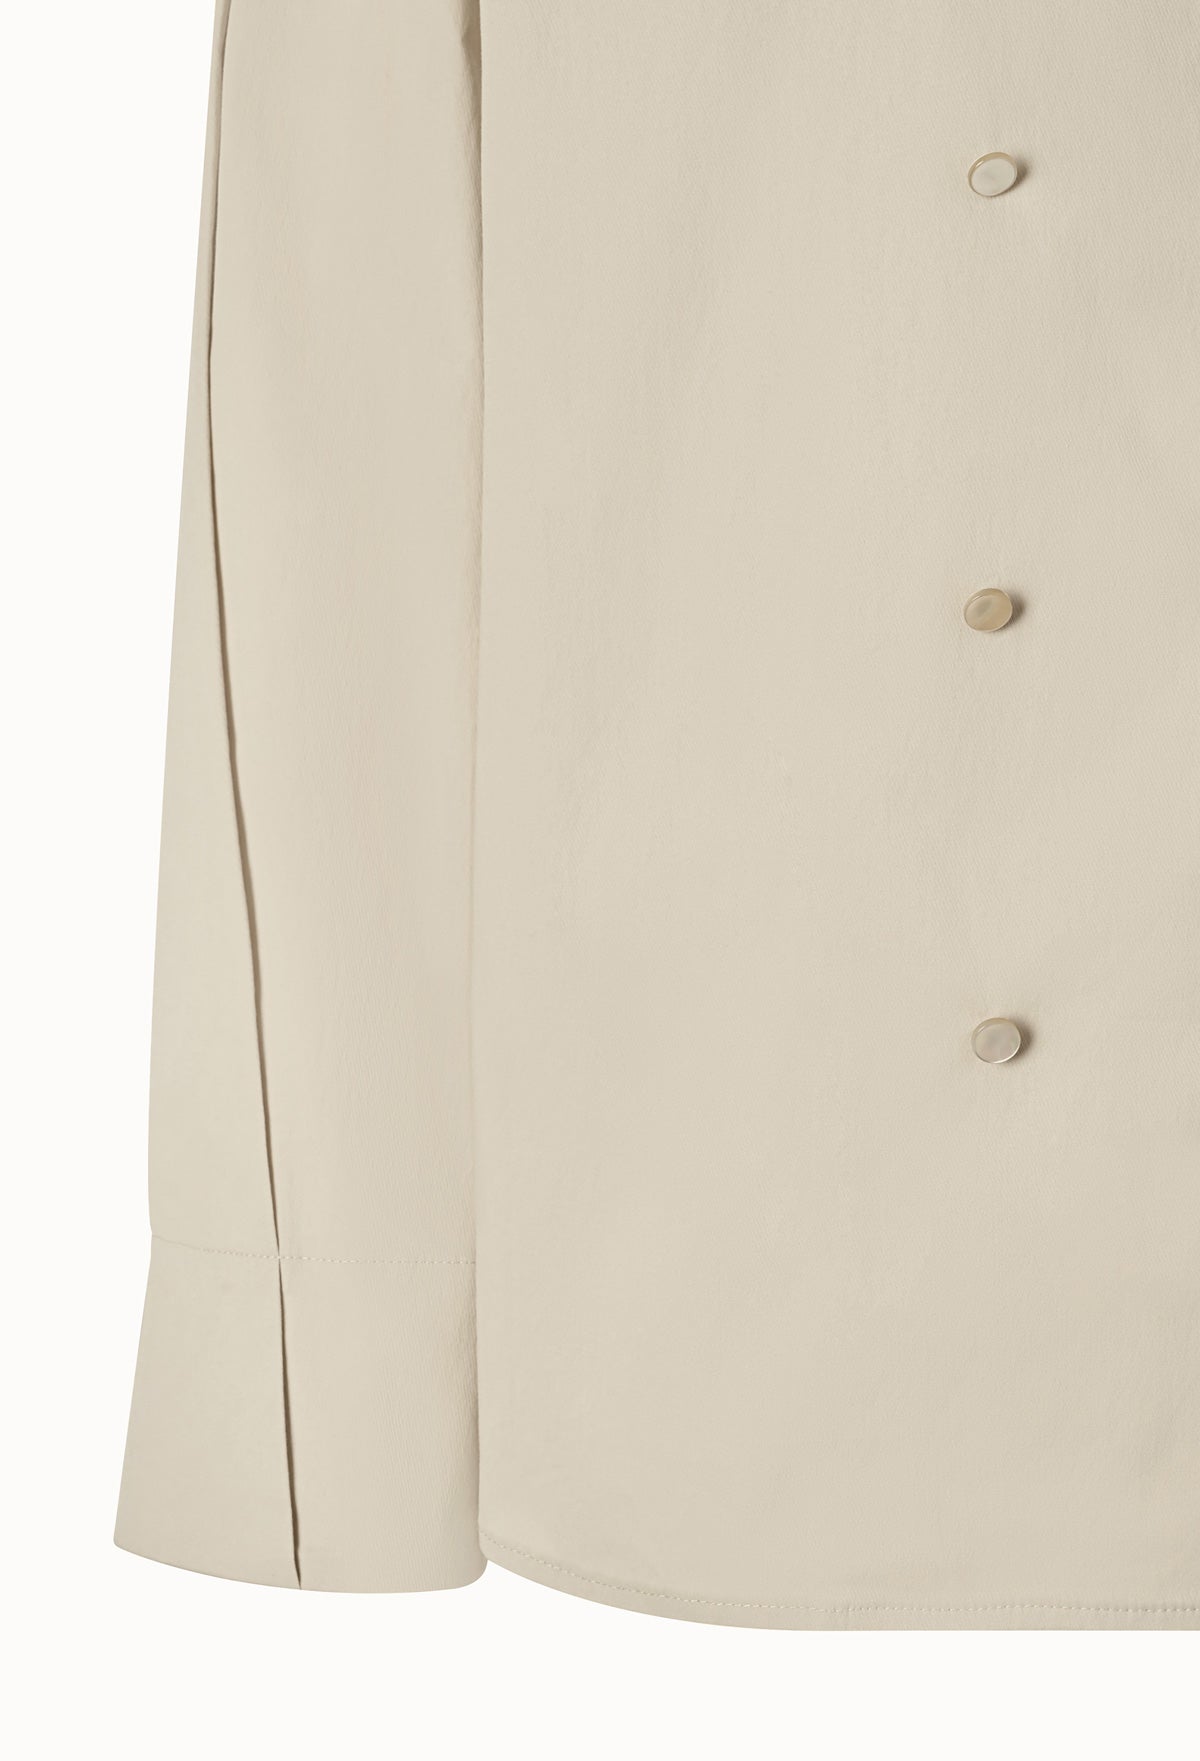 Double-breasted Shirt Jacket In Light Beige